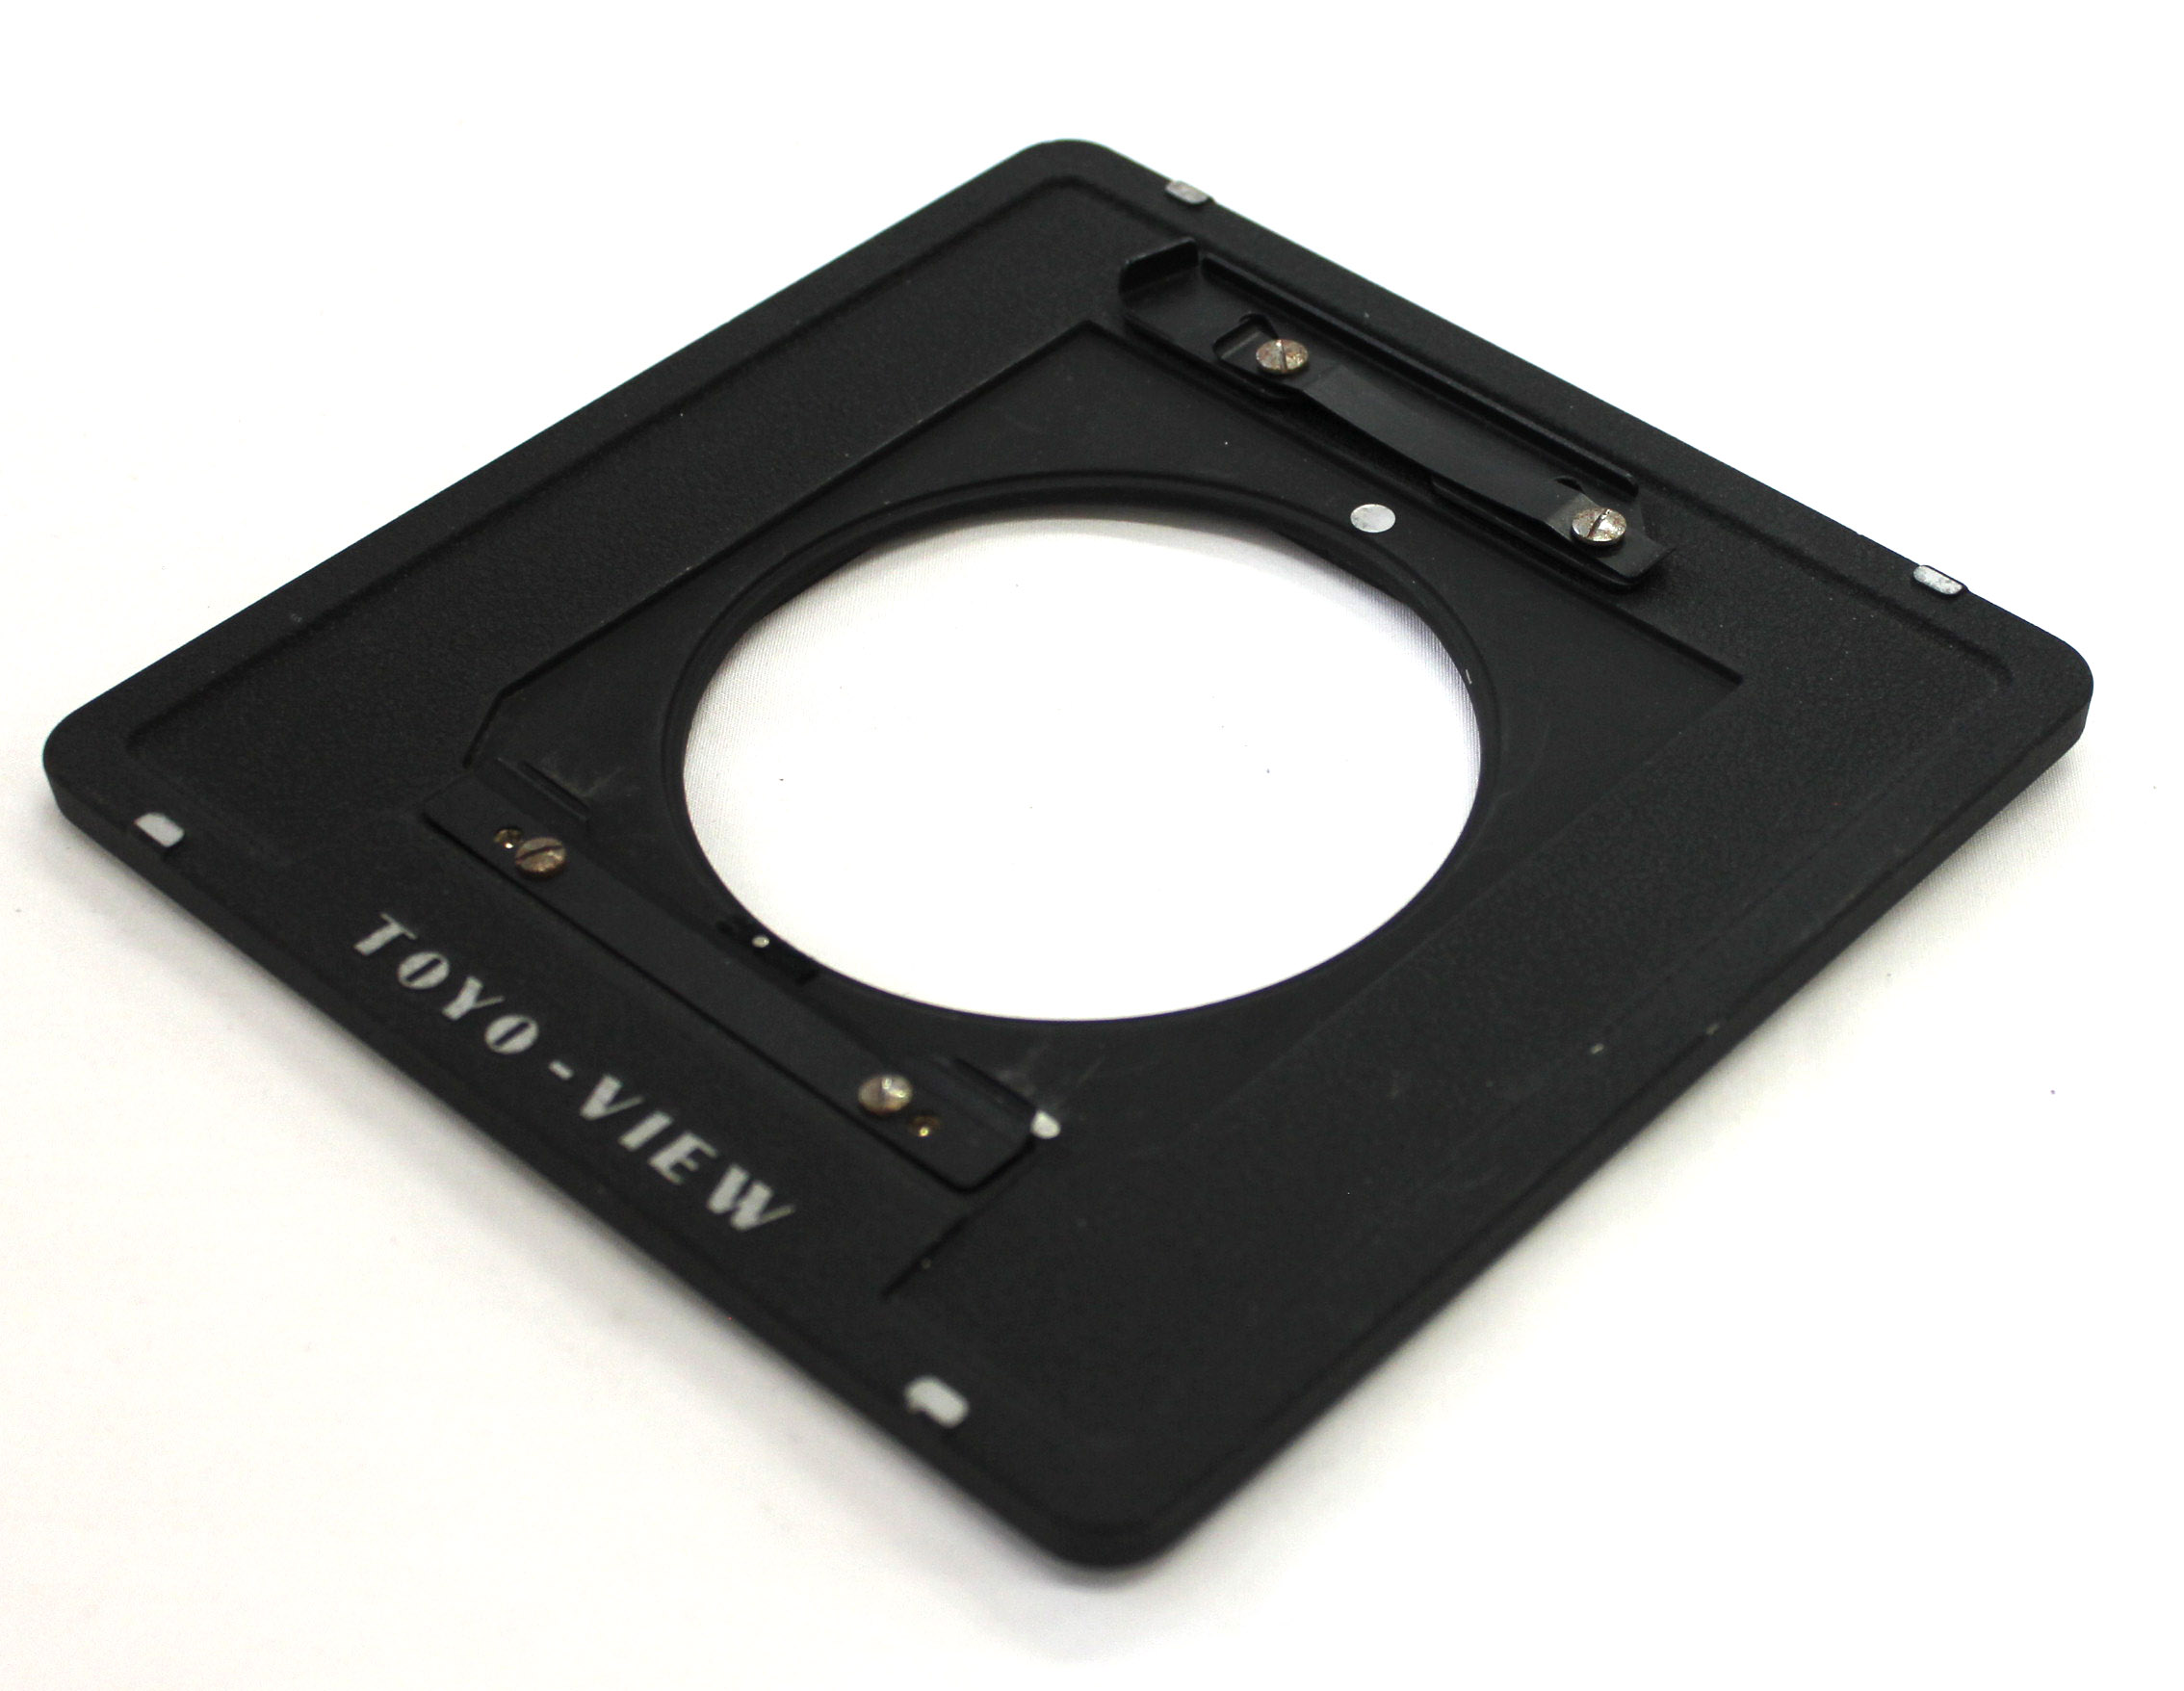 Japan Used Camera Shop | Toyo View 4x5 Lens Board Adapter #1051 ALVM for Linhof Wista Board from Japan